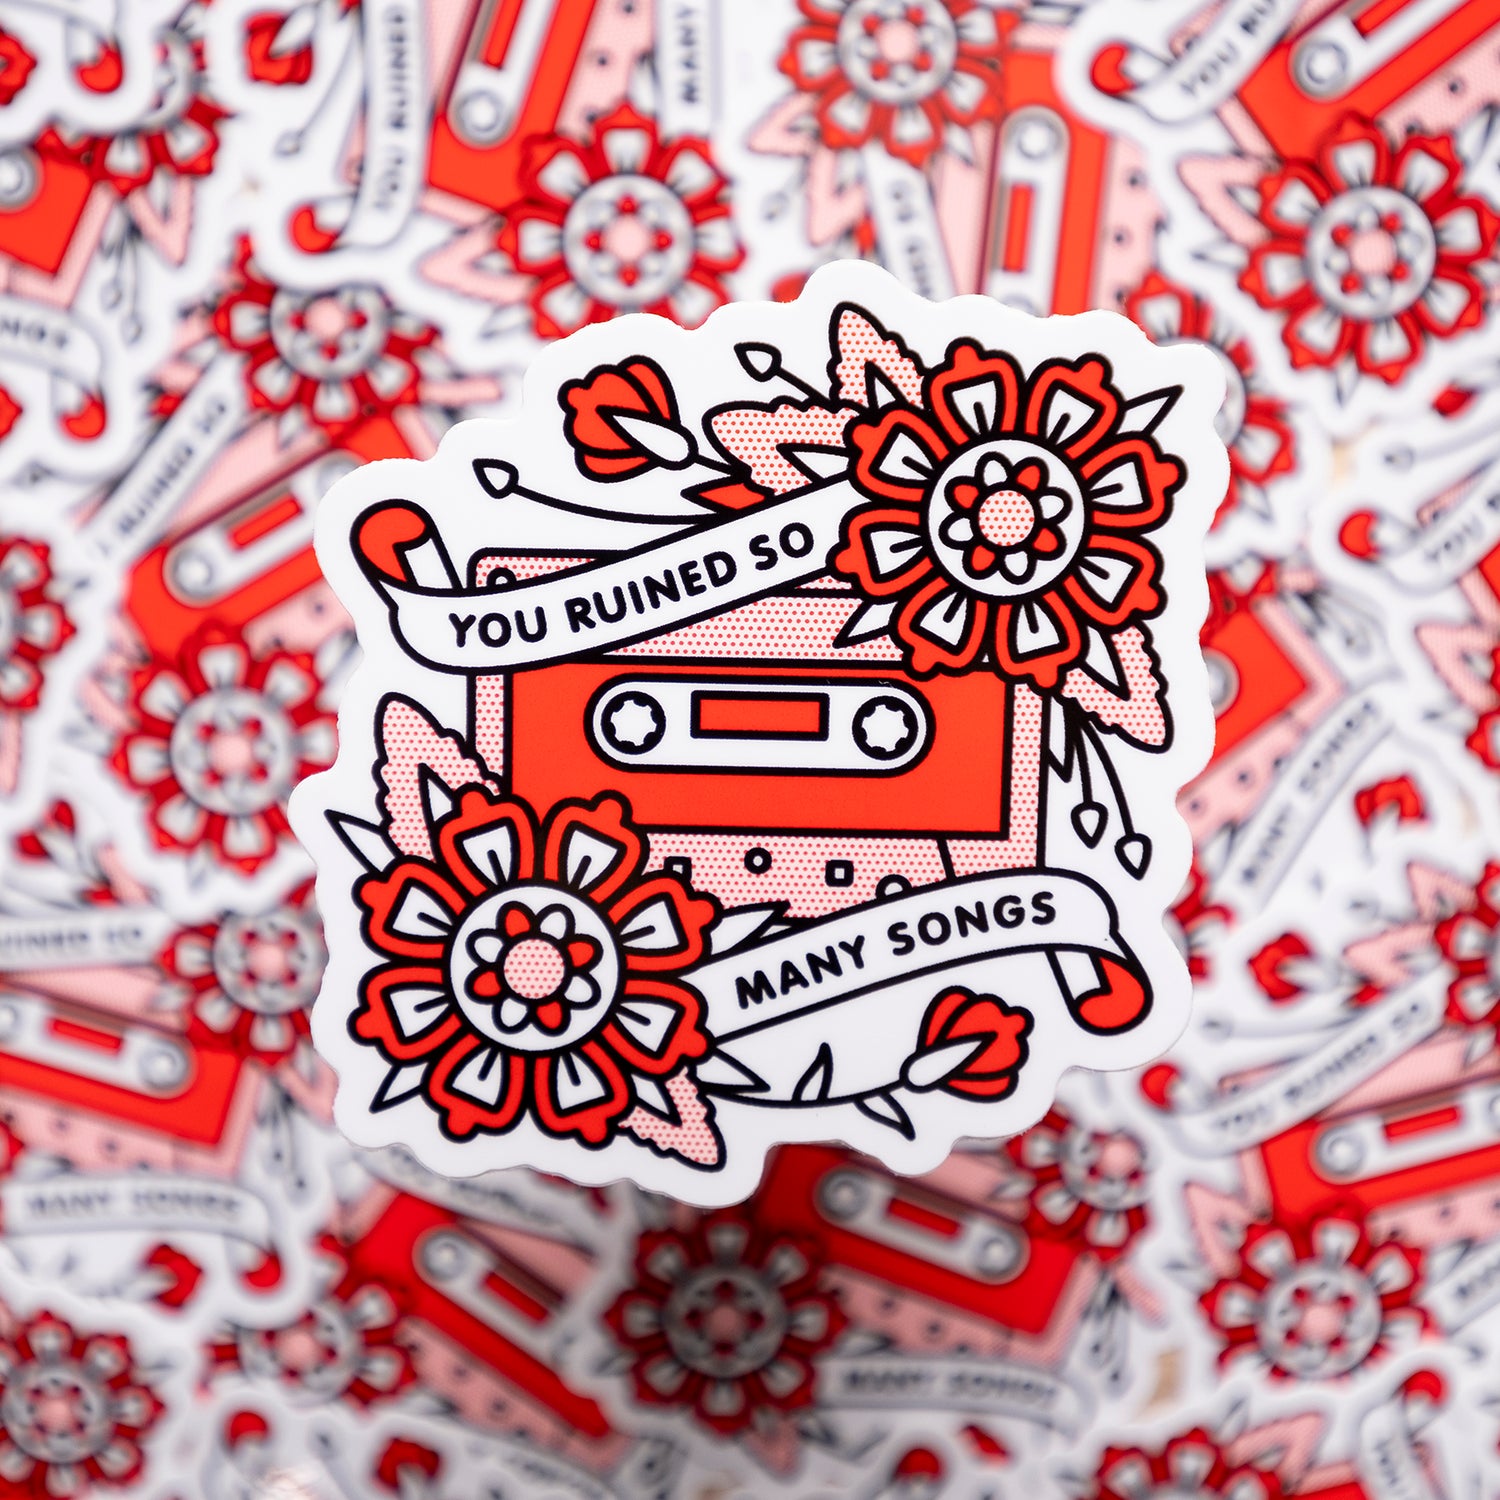 A 3.1x3.1" vinyl art sticker of a cassette tape with two flowers and banners overlaid on adjacent corners with text that reads: You ruined so many songs. Drawn in a flash tattoo and pop art fusion style in a red, white and black color palette by the artist, Red Halftone.